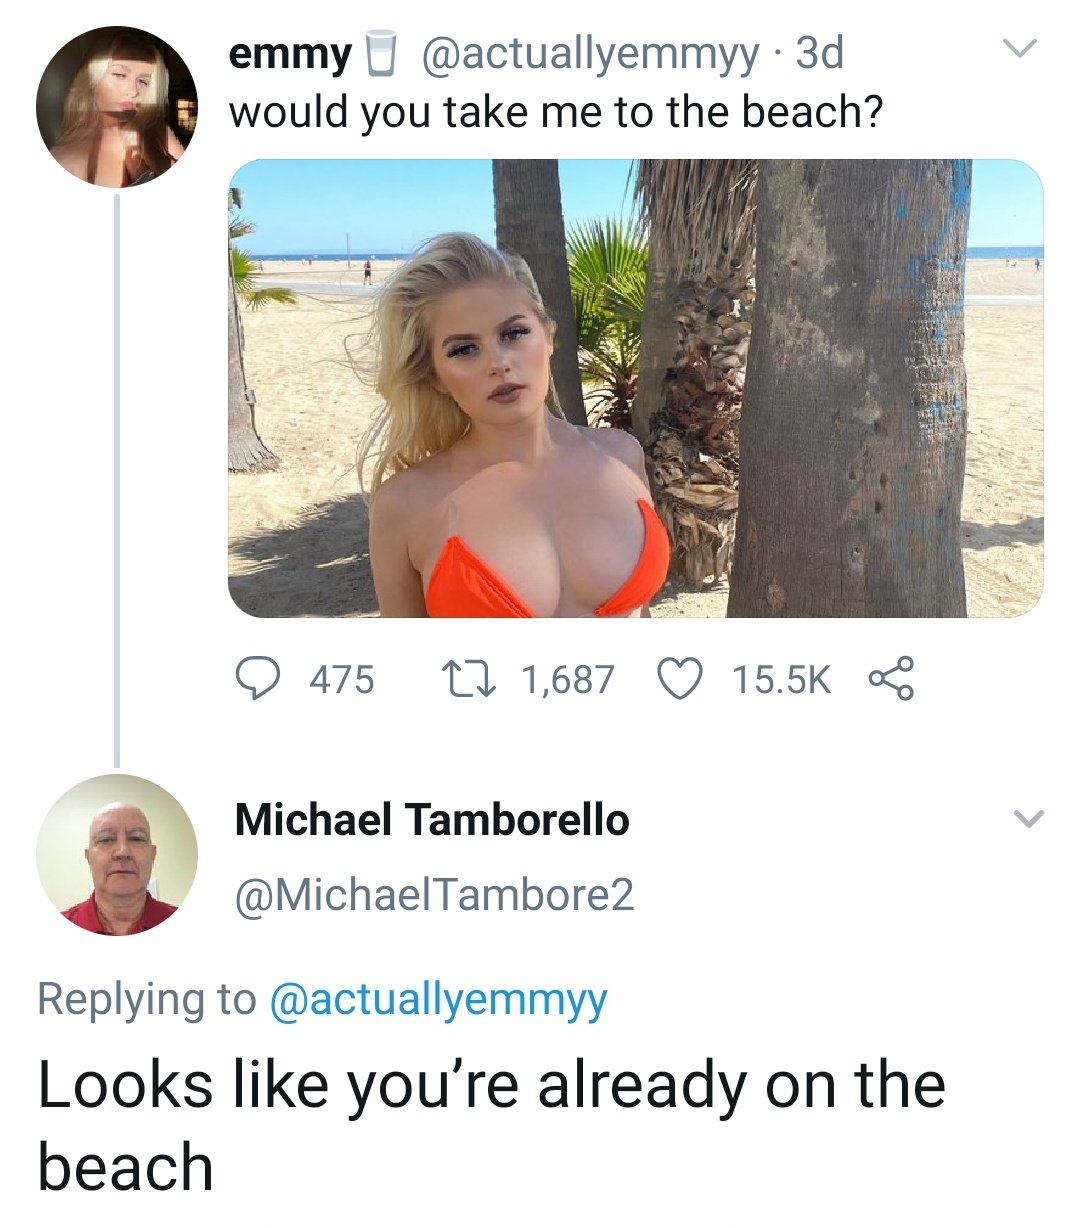 photo caption - emmy . 3d would you take me to the beach? 475 12 1,687 Michael Tamborello Looks you're already on the beach